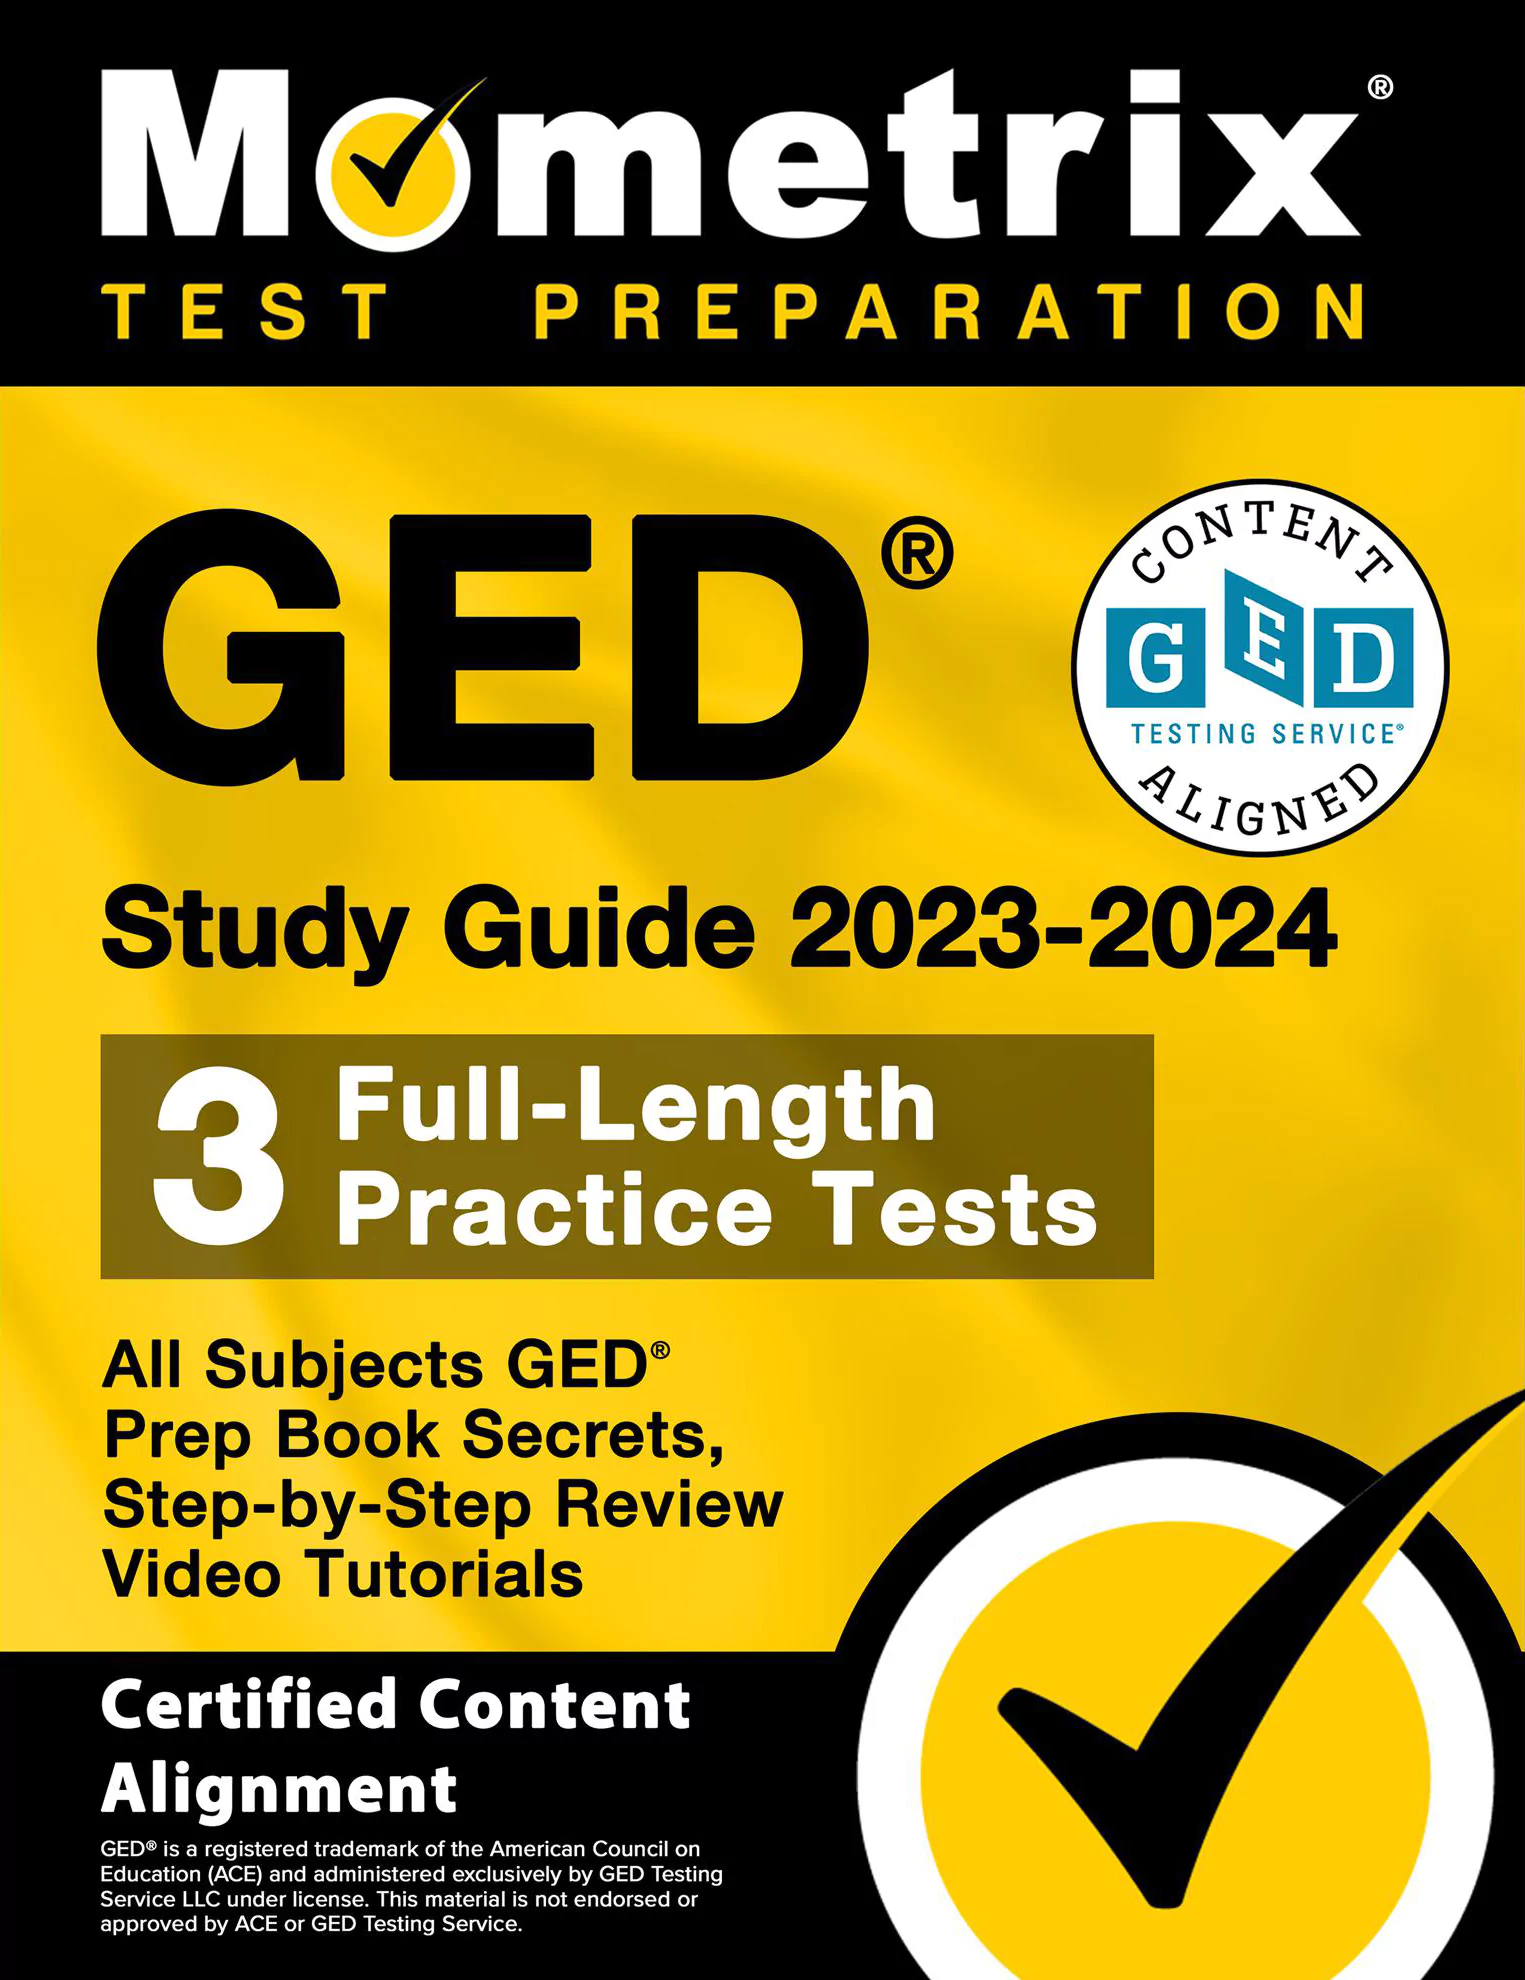 Advertisement from Mometrix for the GED 2023-2024 study guide.